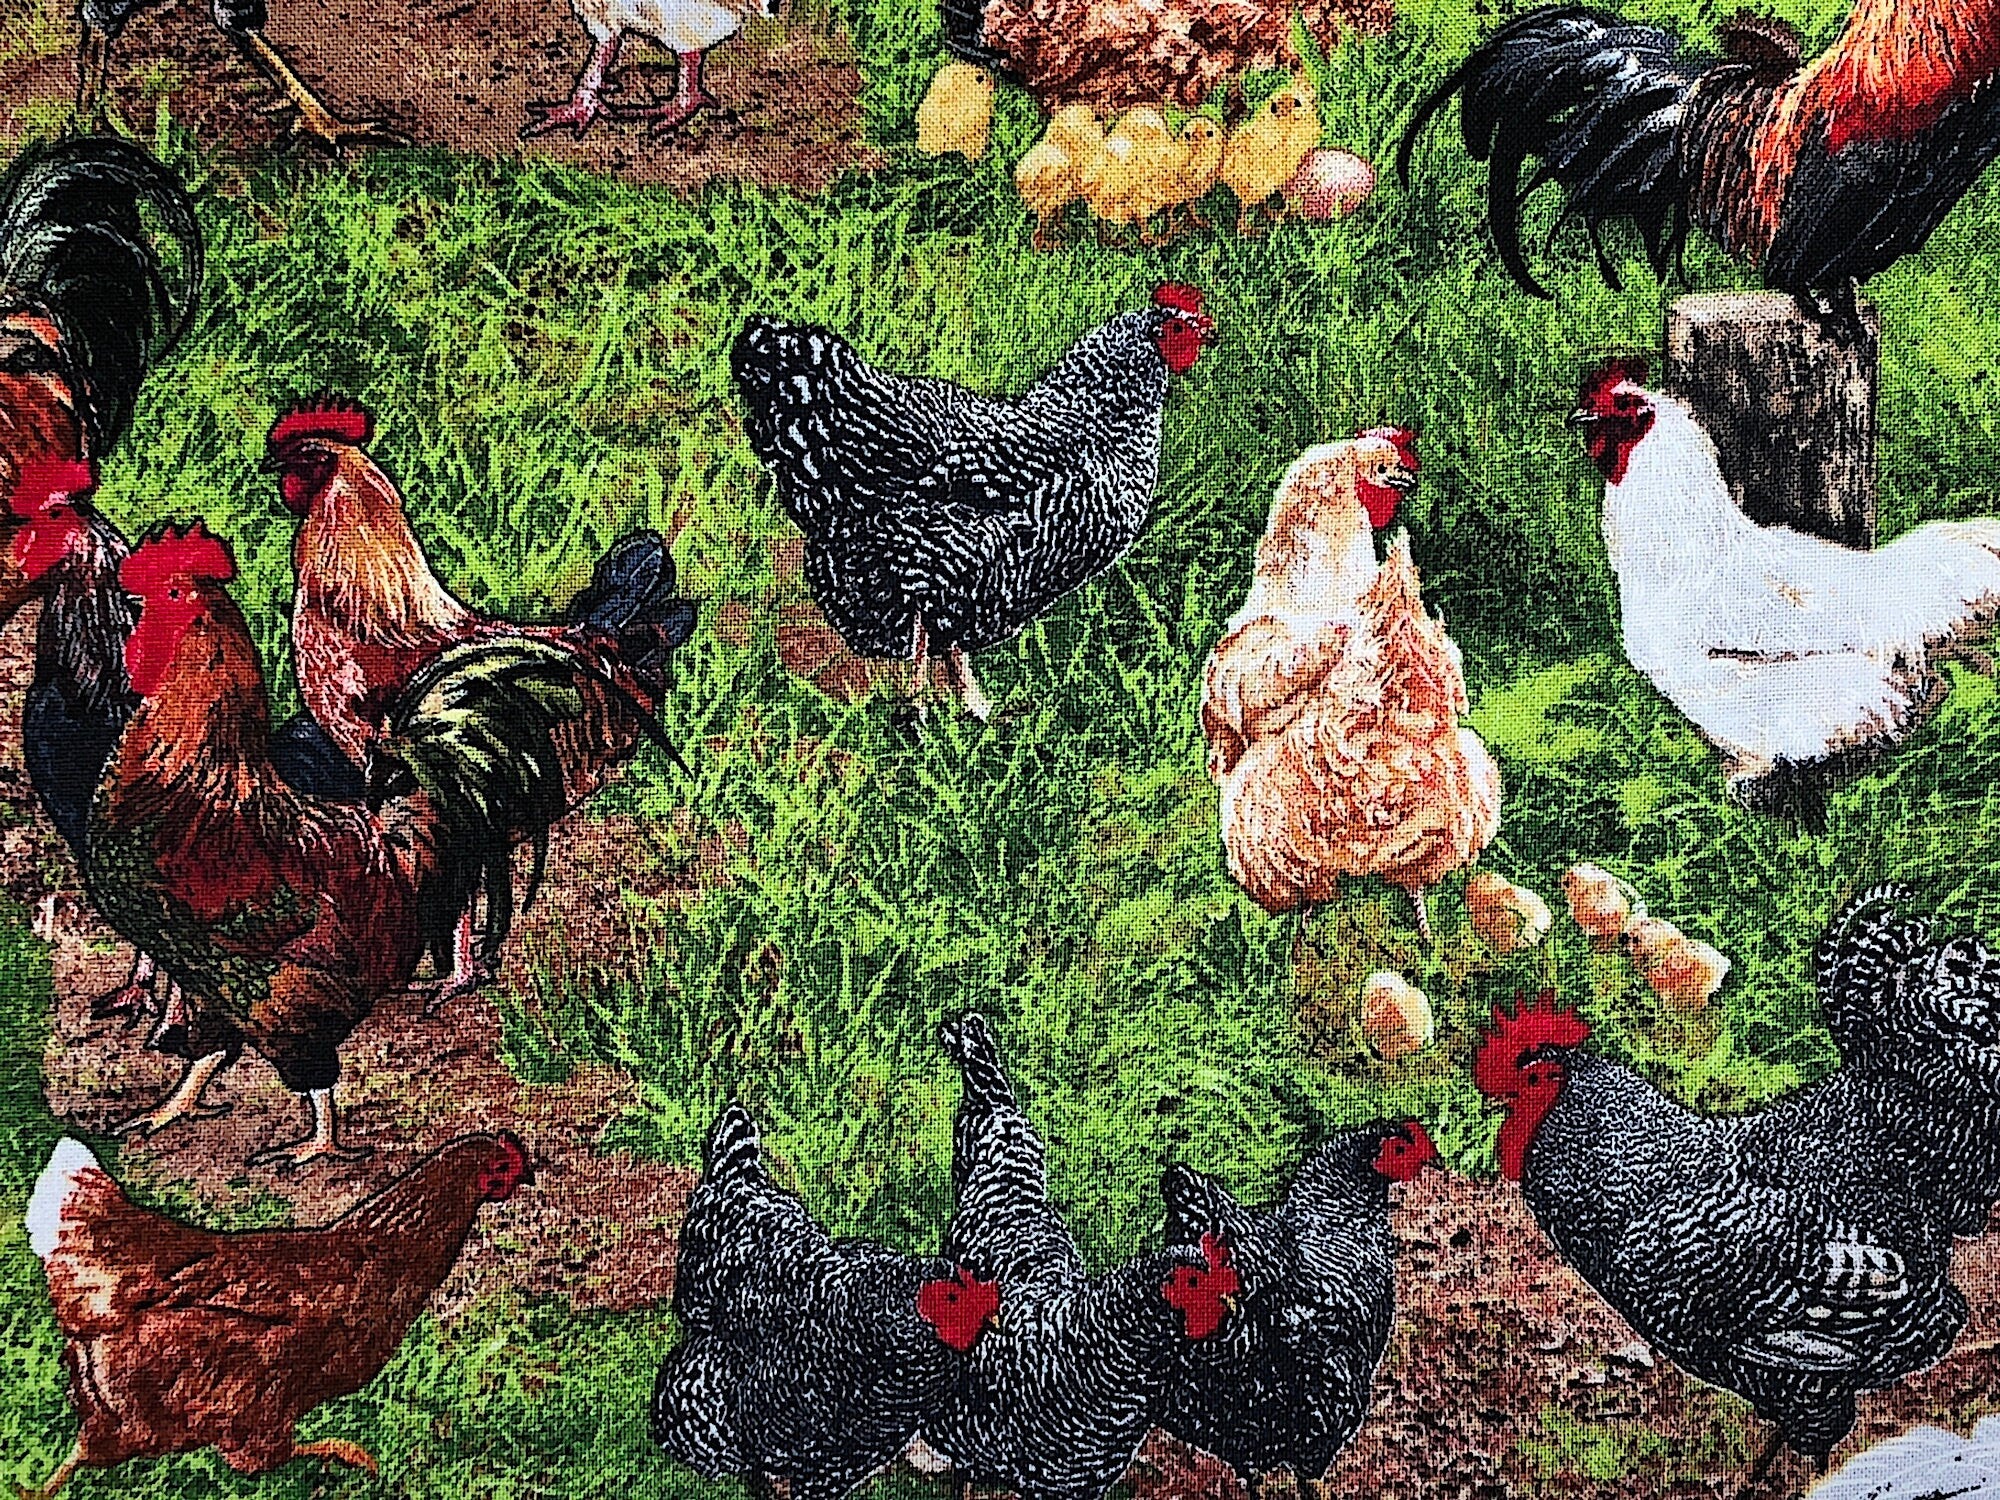 Close up of chickens and roosters in a grassy yard.